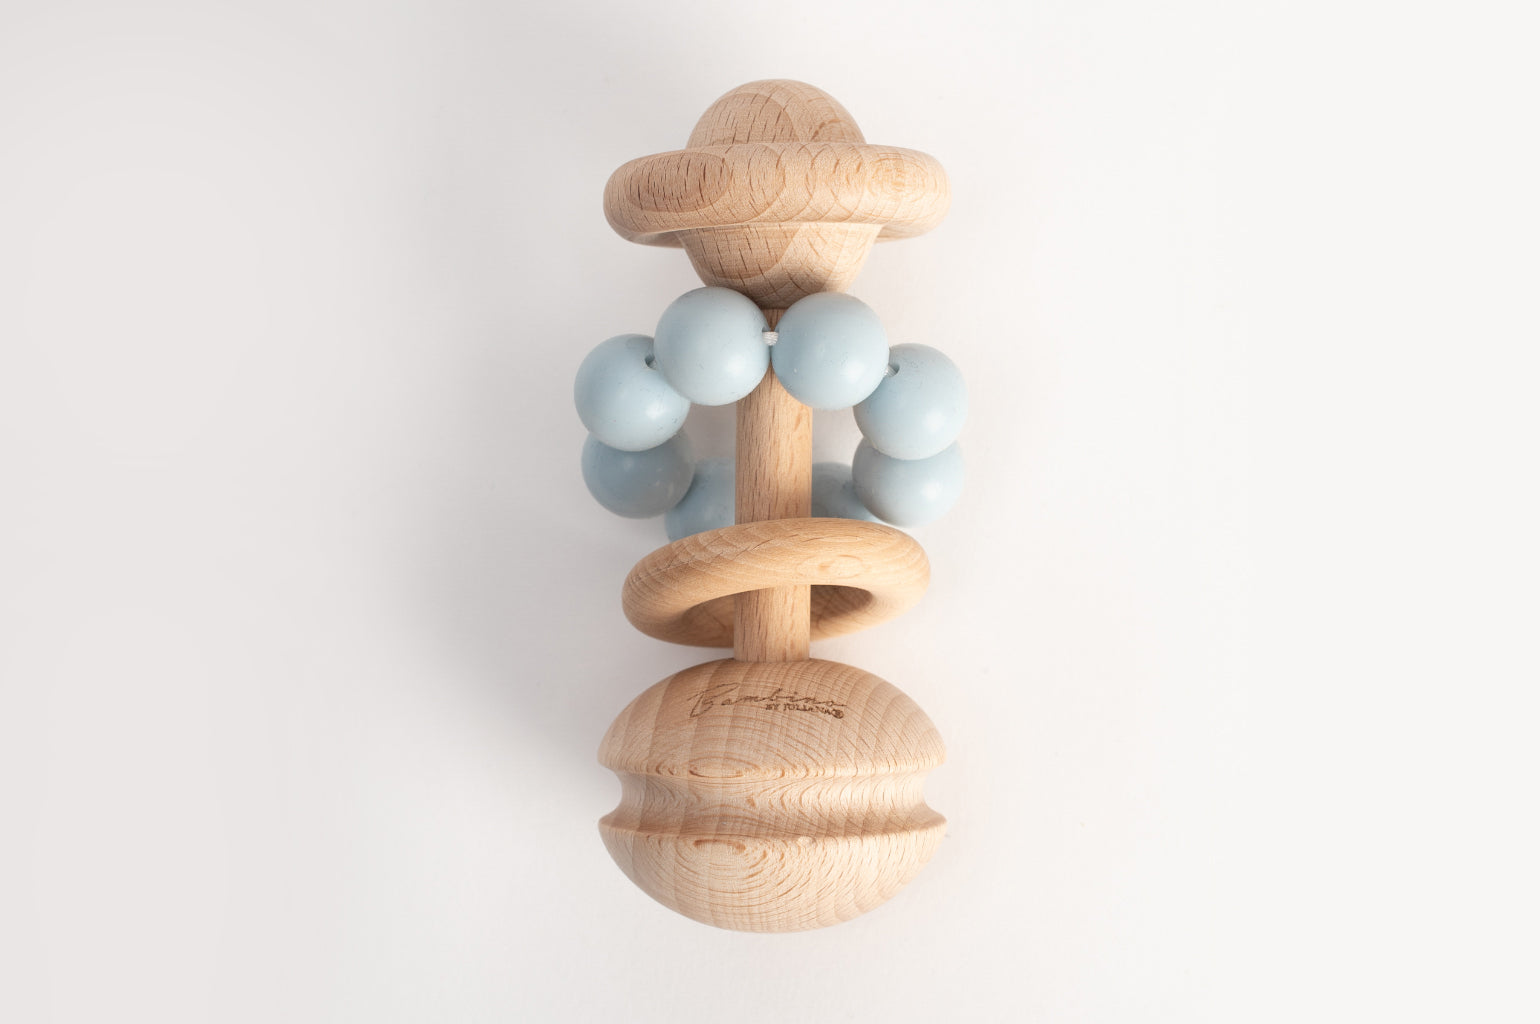 Traditional Wooden Baby teether rattle - blue